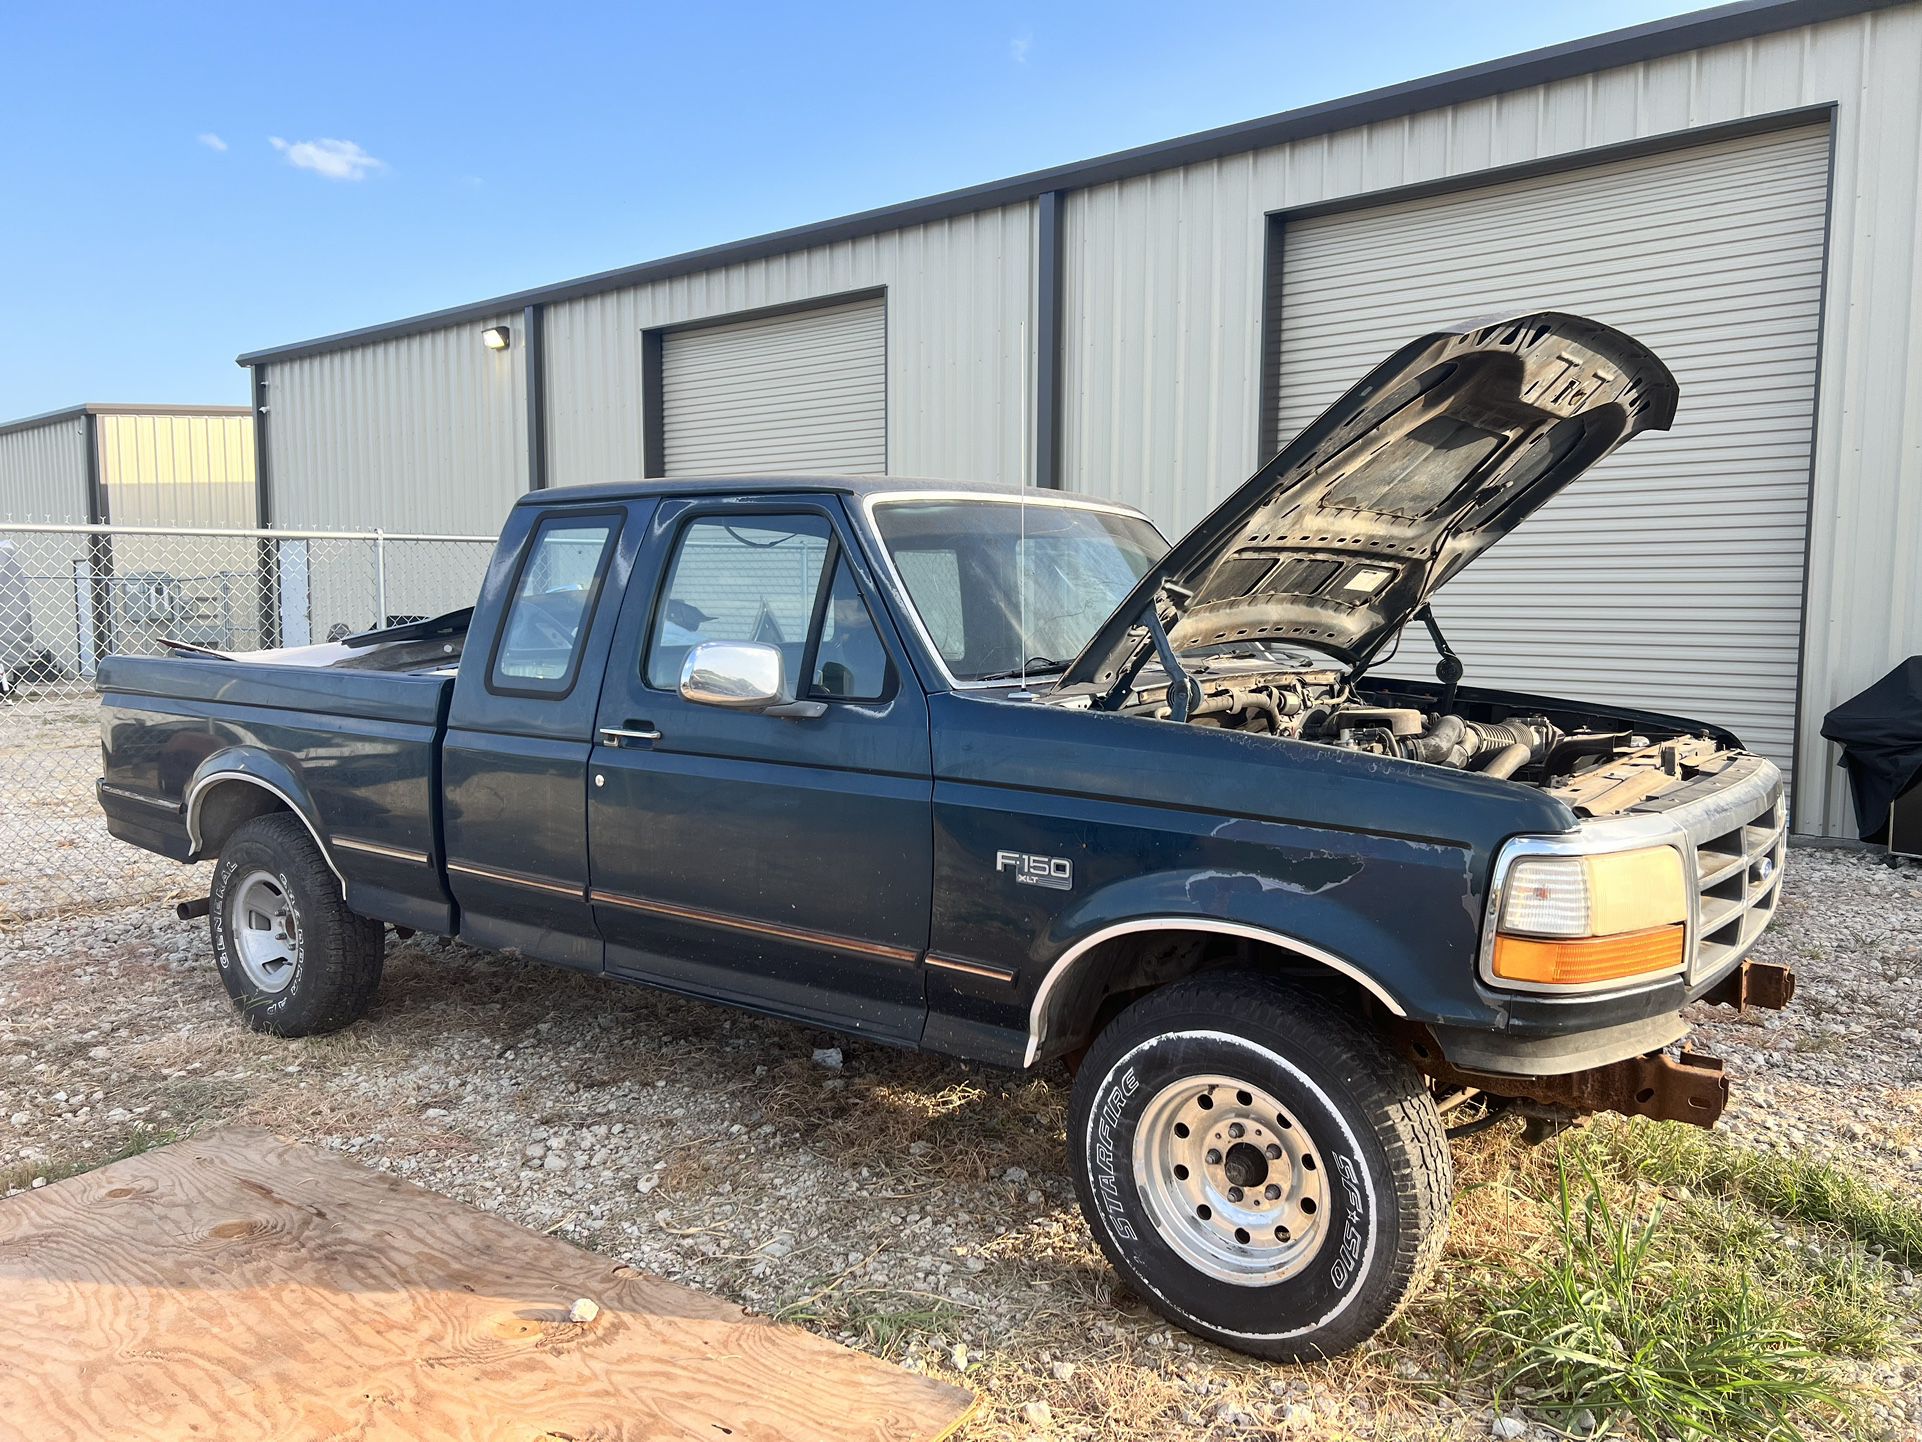 Ford F150 XLT parts, fitting year range 87-96